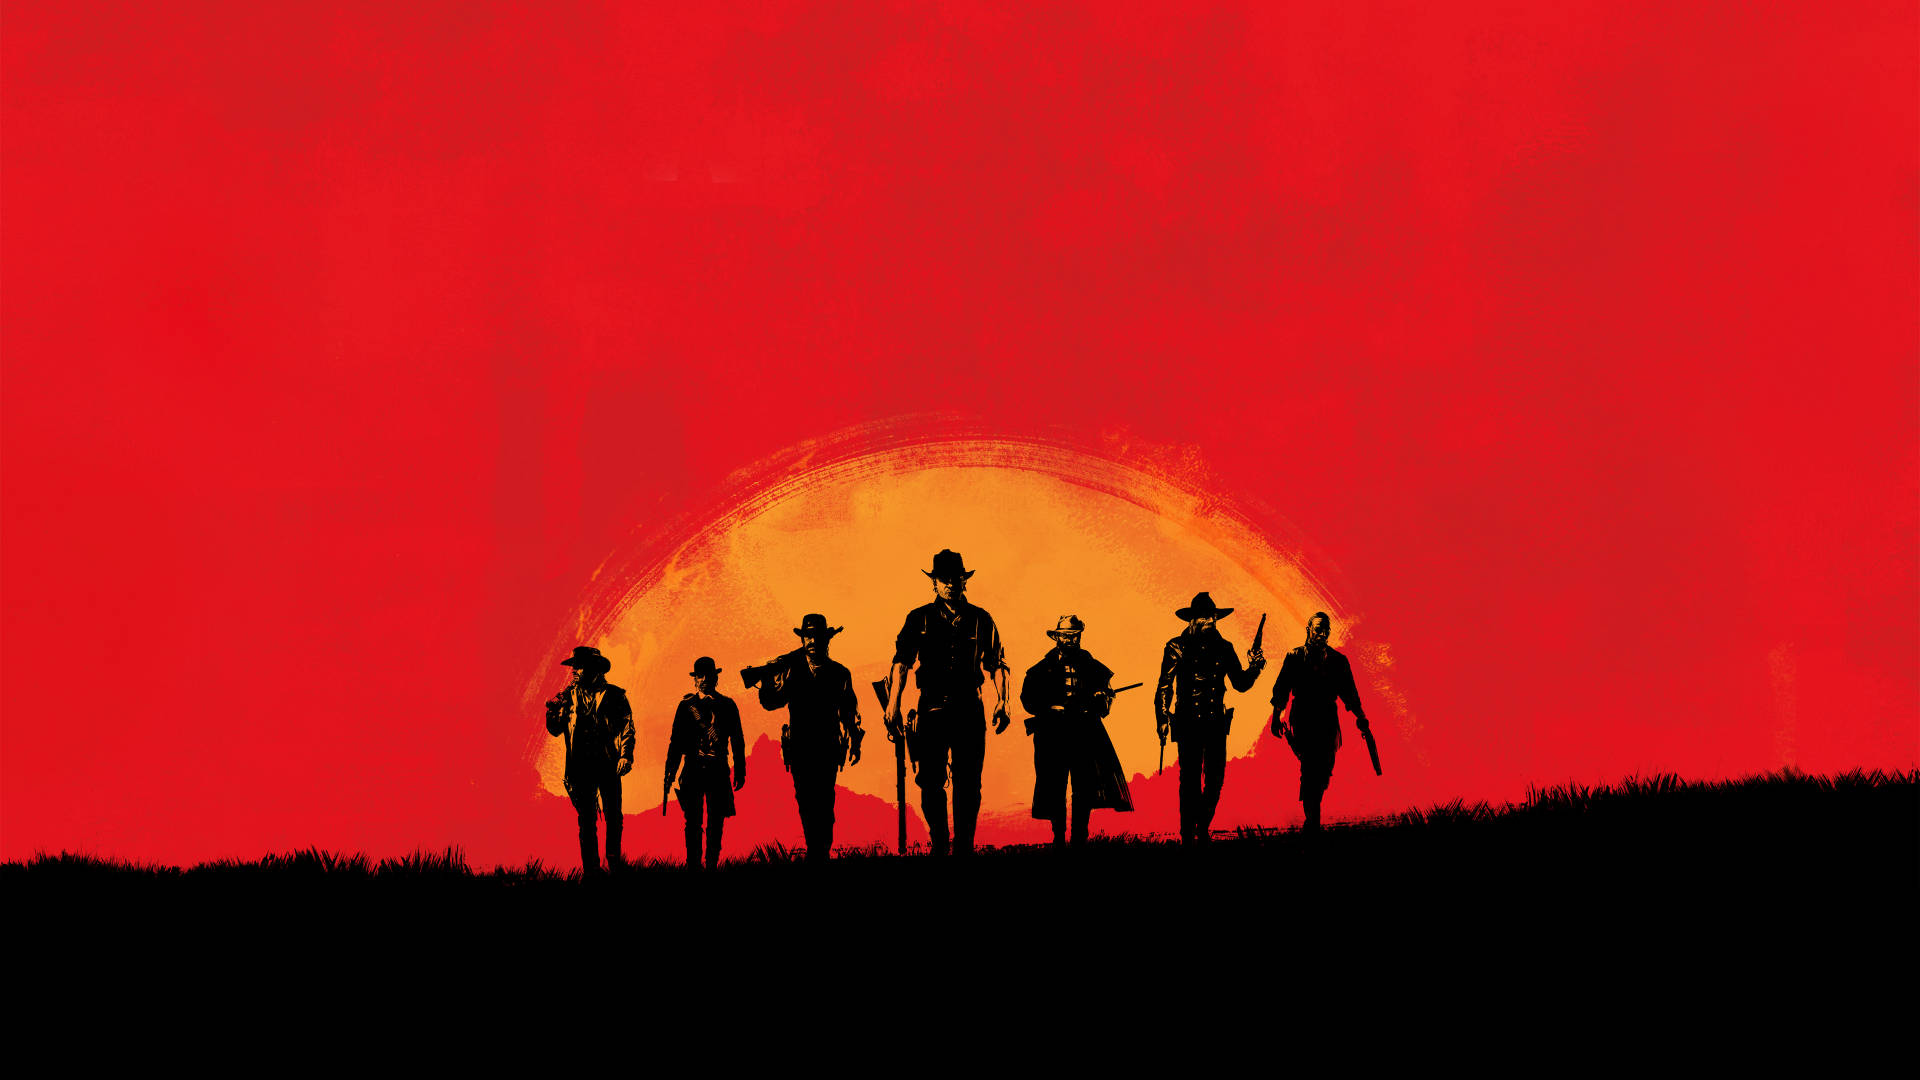 Live A Life Of Adventure As Arthur Morgan In Red Dead Redemption 2 Wallpaper